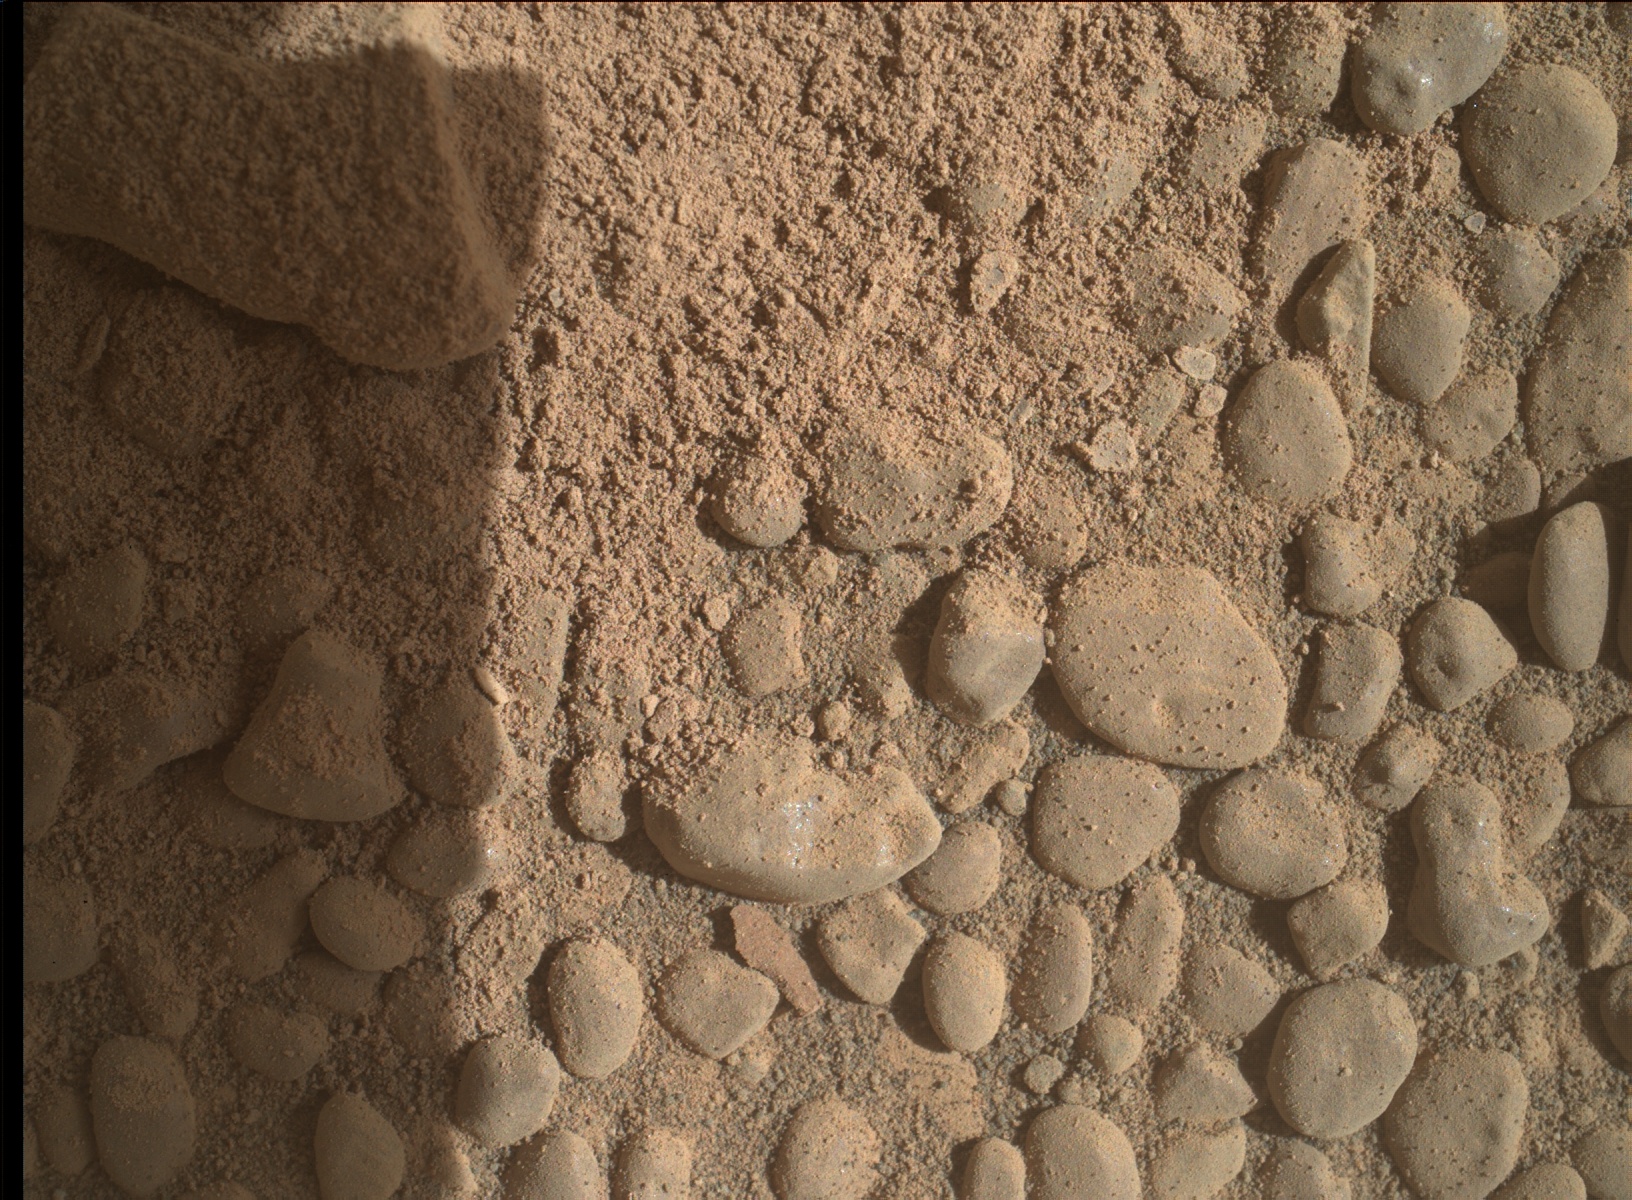 Nasa's Mars rover Curiosity acquired this image using its Mars Hand Lens Imager (MAHLI) on Sol 2523